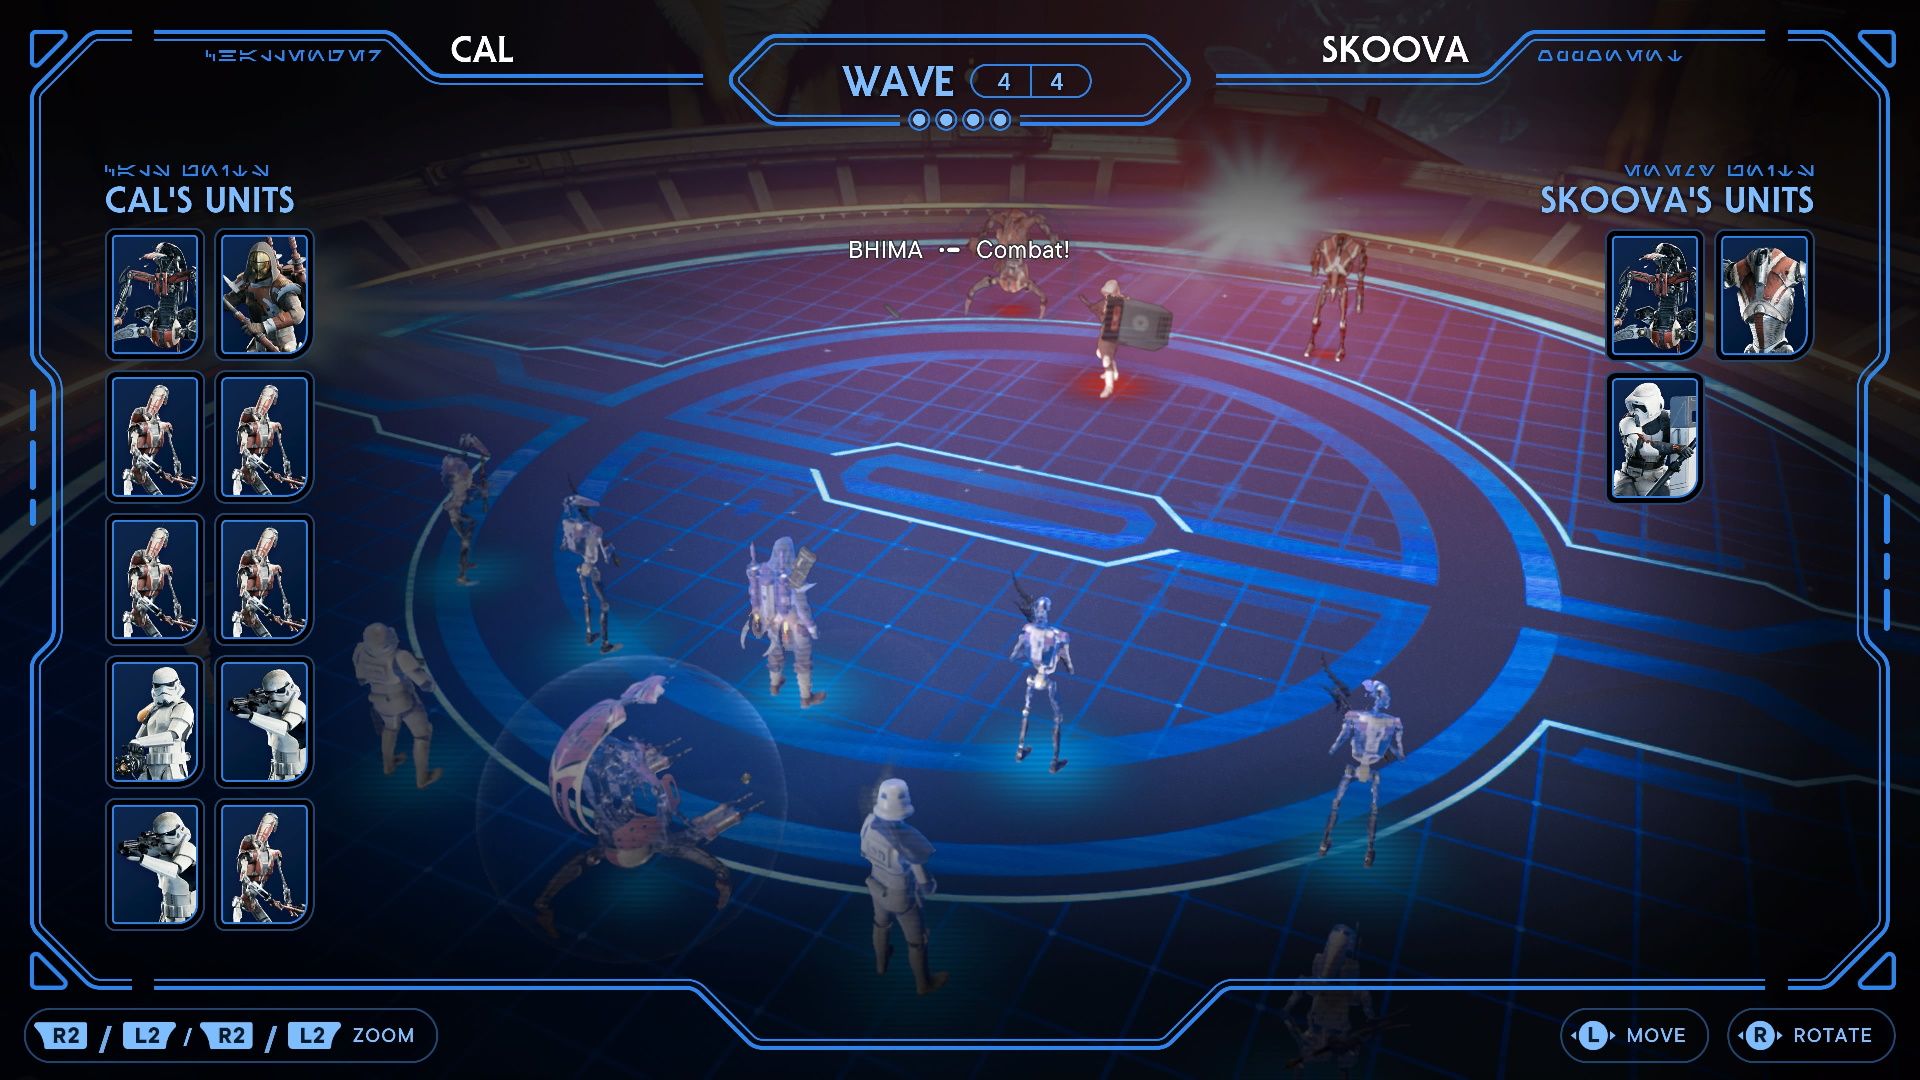 Star Wars Jedi Survive, The Droidka backed up by a small army, Holotactics